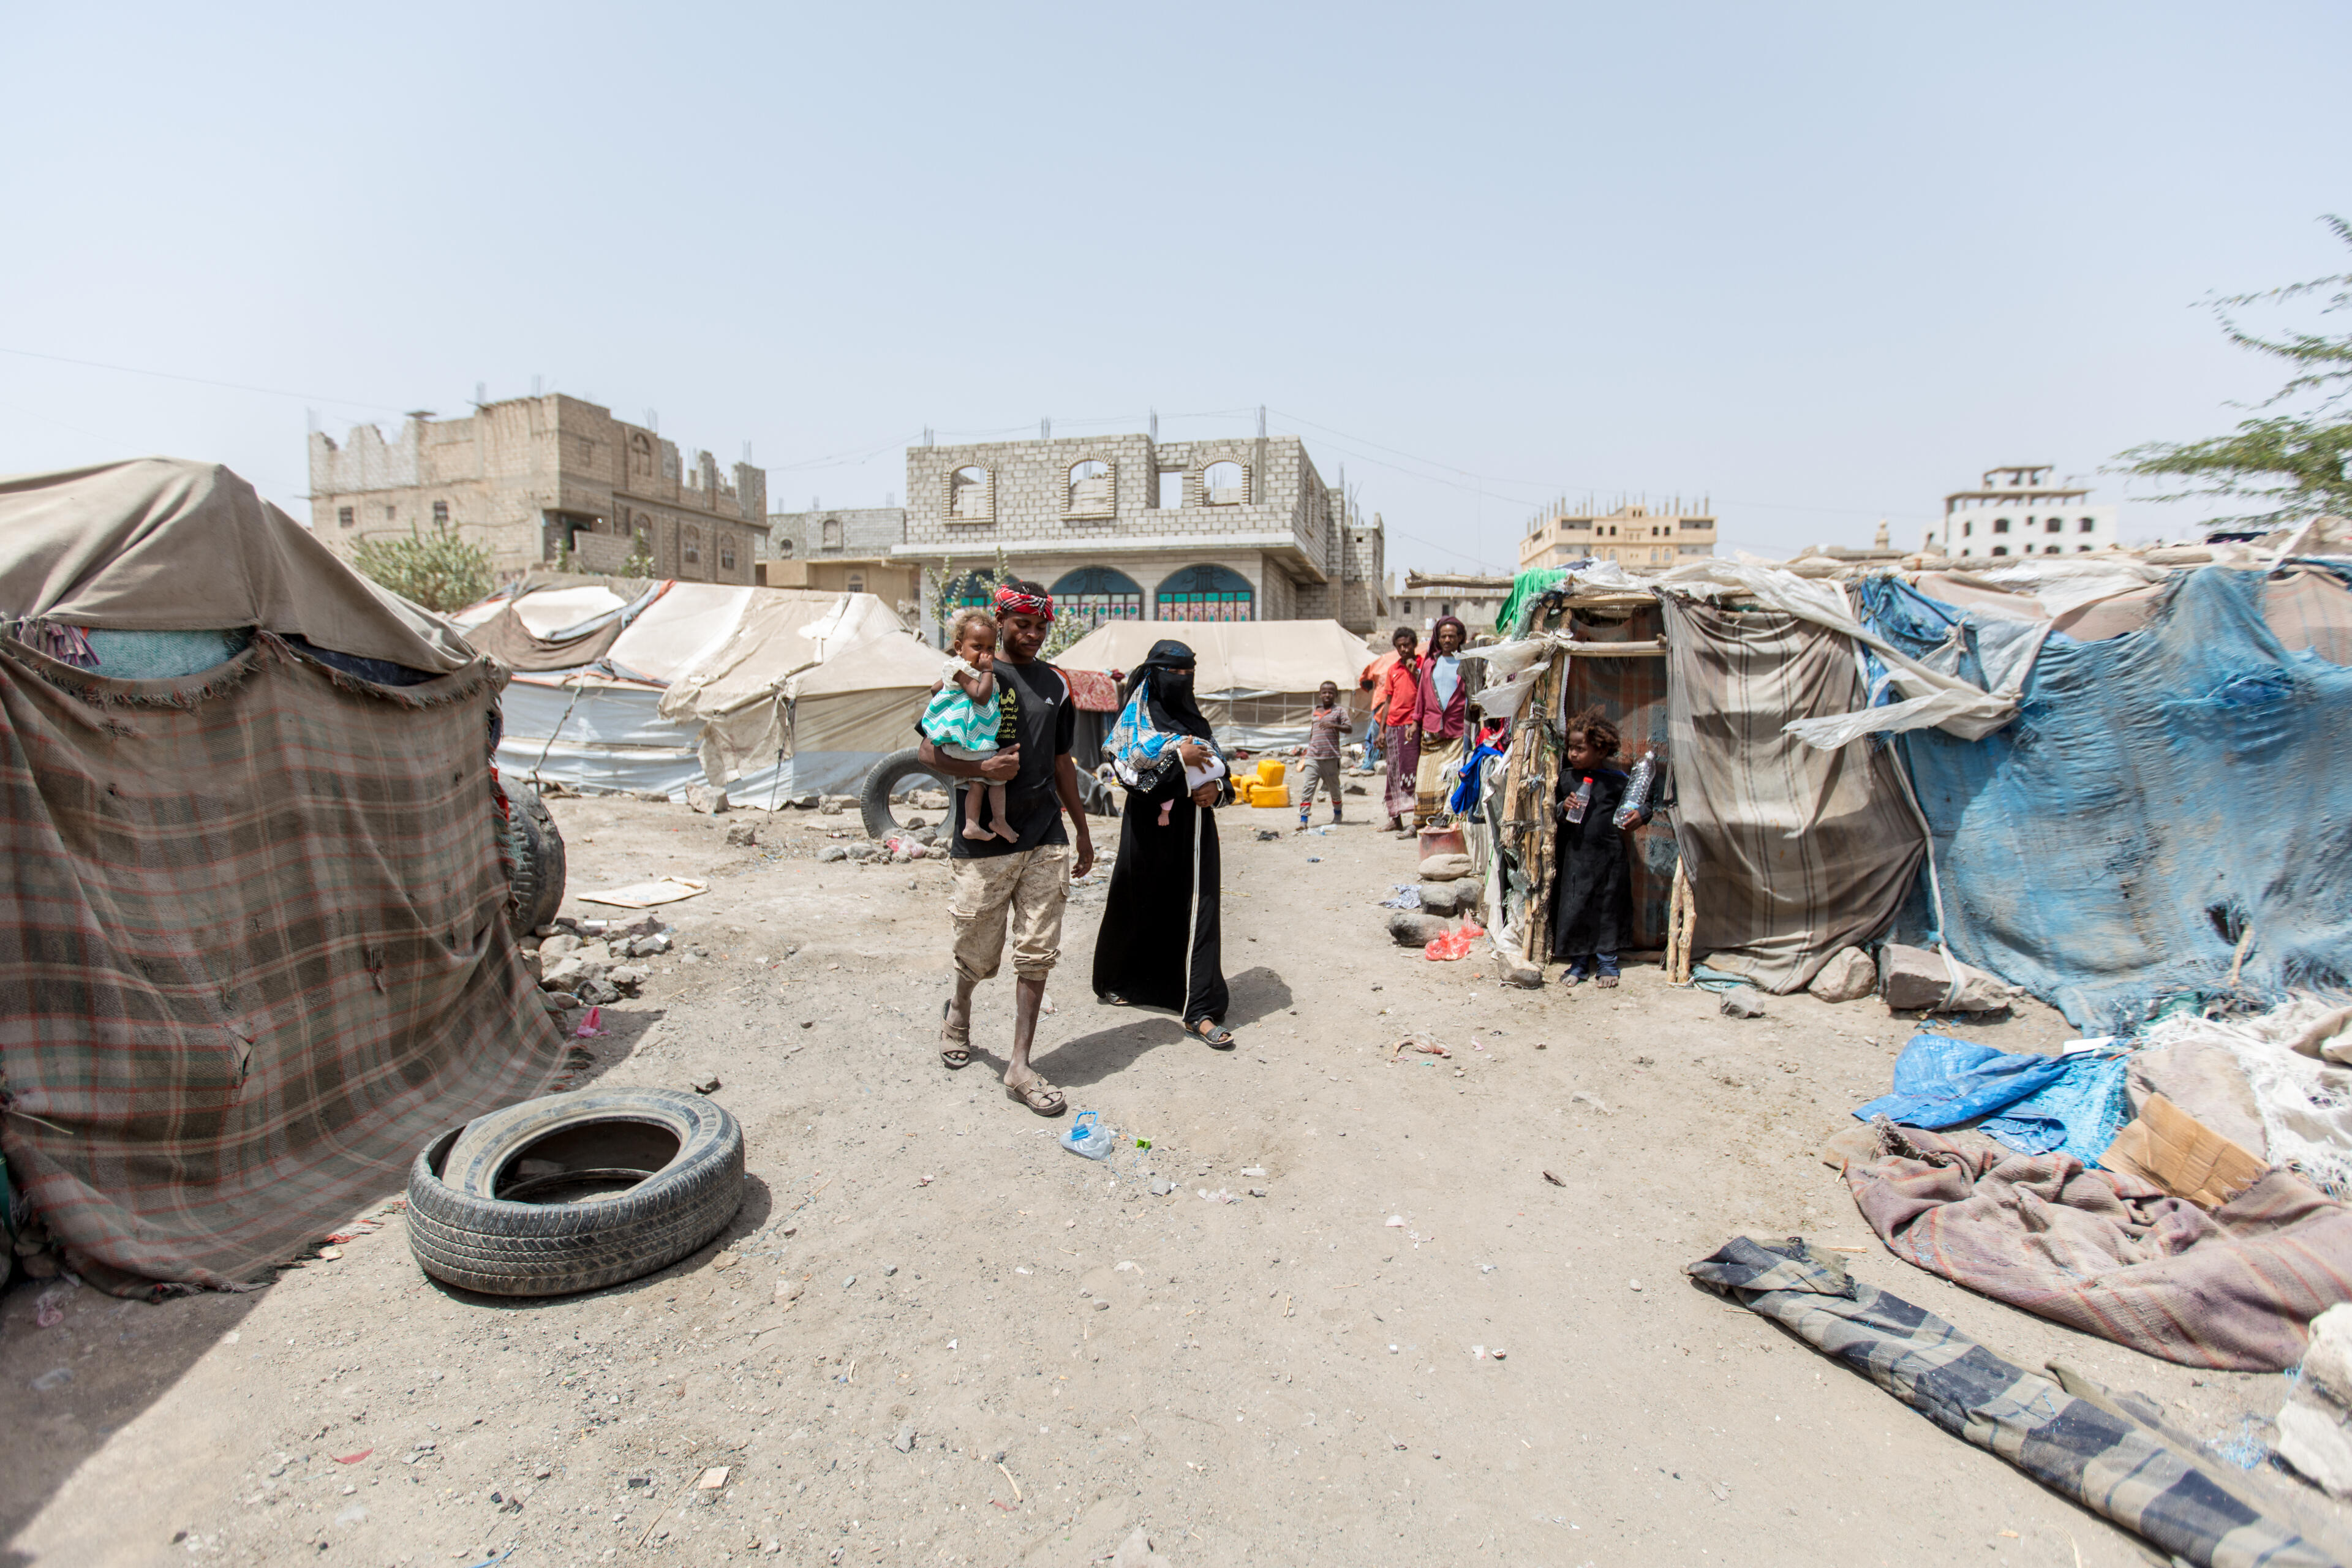 Bodor, carrying her infant daughter walks with her husband and toddler through the camp where they live in a tent alongside other families displaced by the war in Yemen.